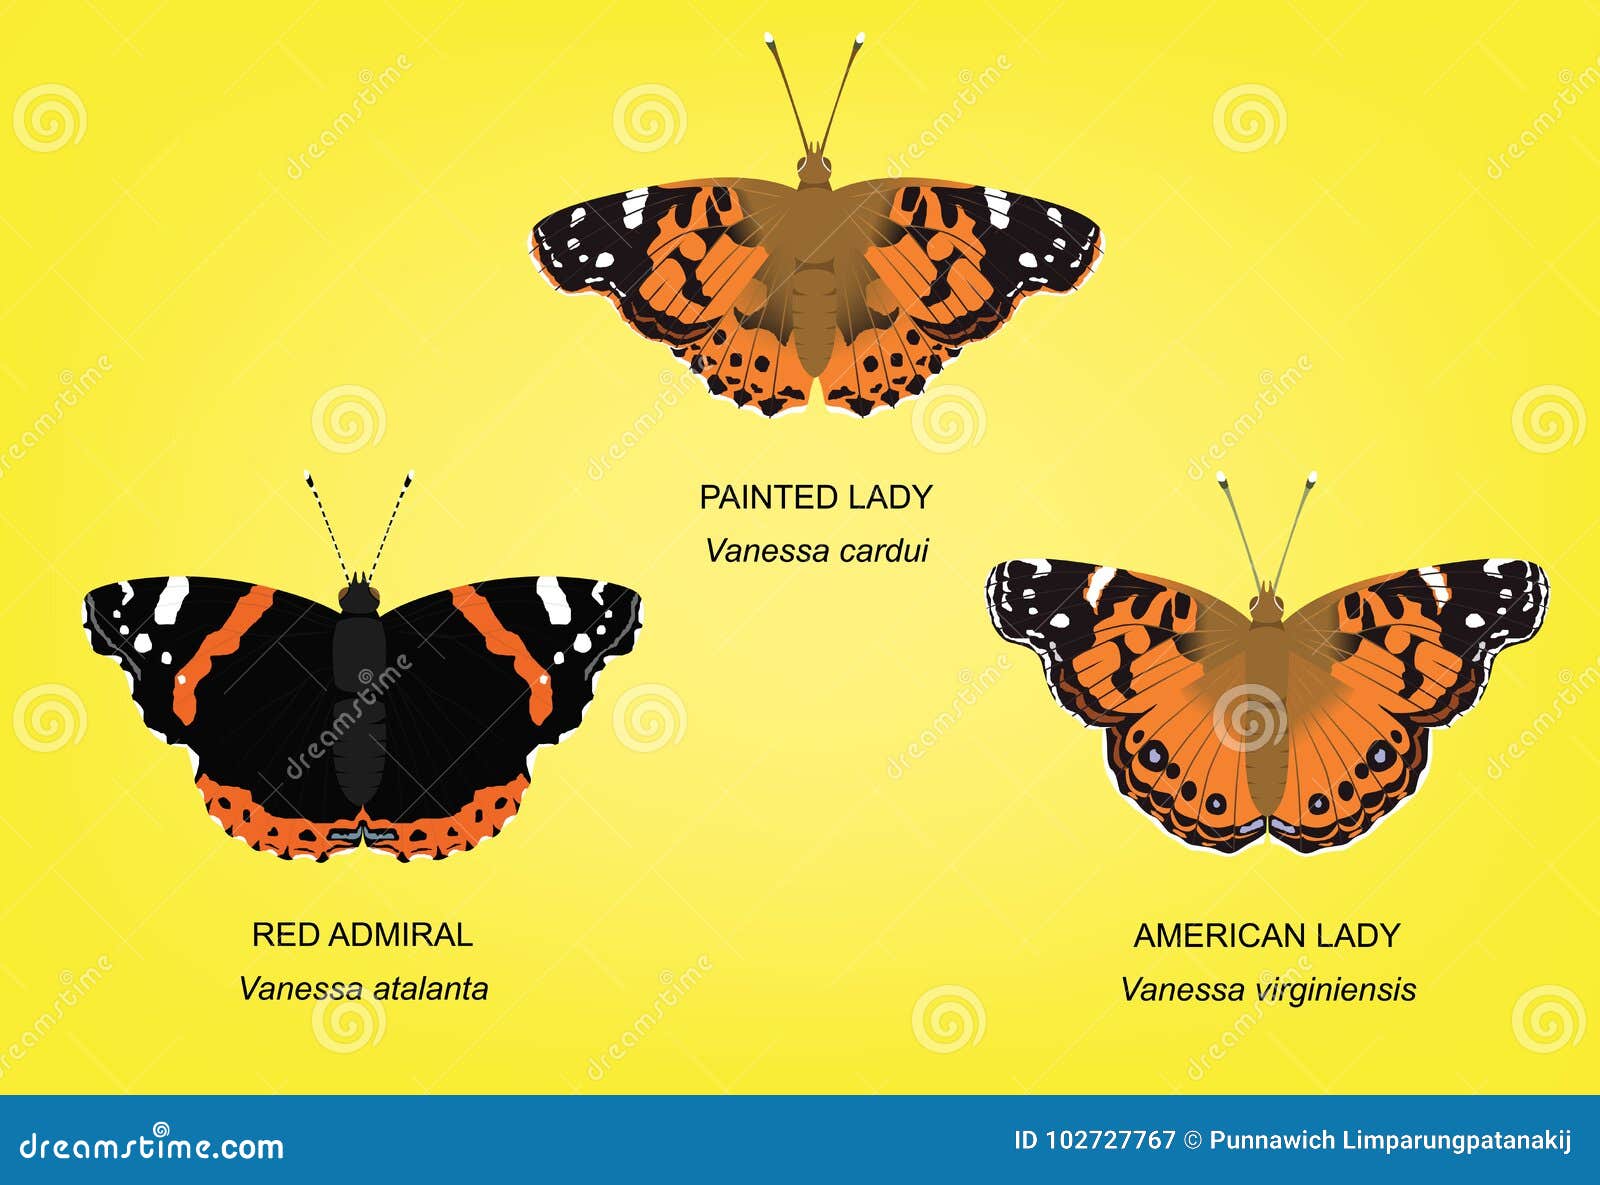 Painted Lady Butterfly Images  Free Photos PNG Stickers Wallpapers   Backgrounds  rawpixel